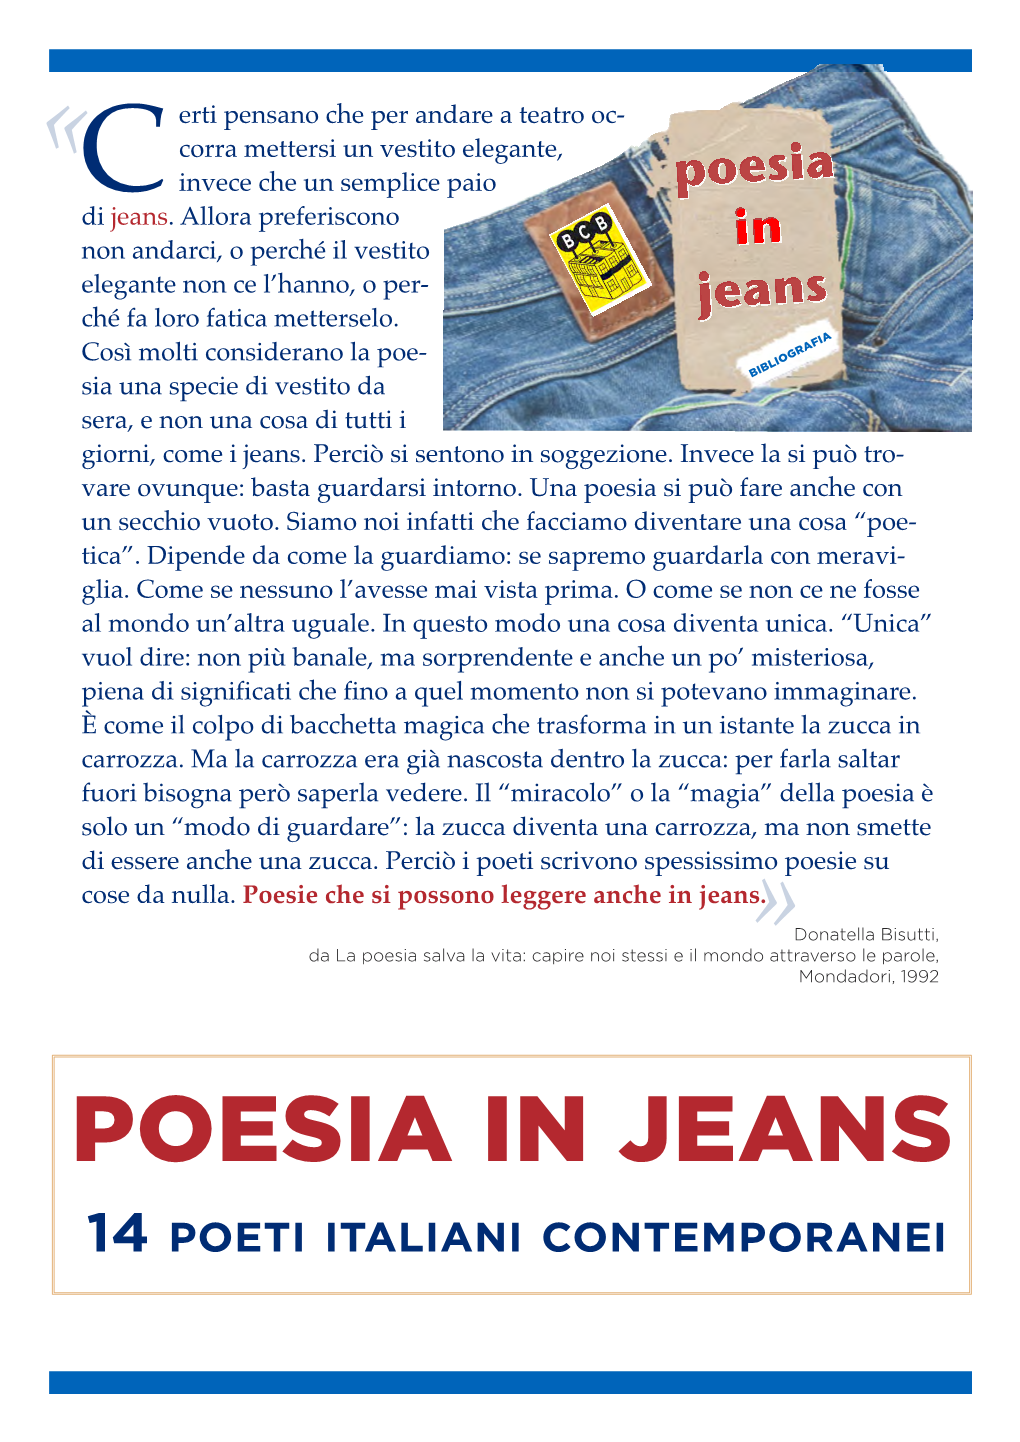 Poesia in Jeans